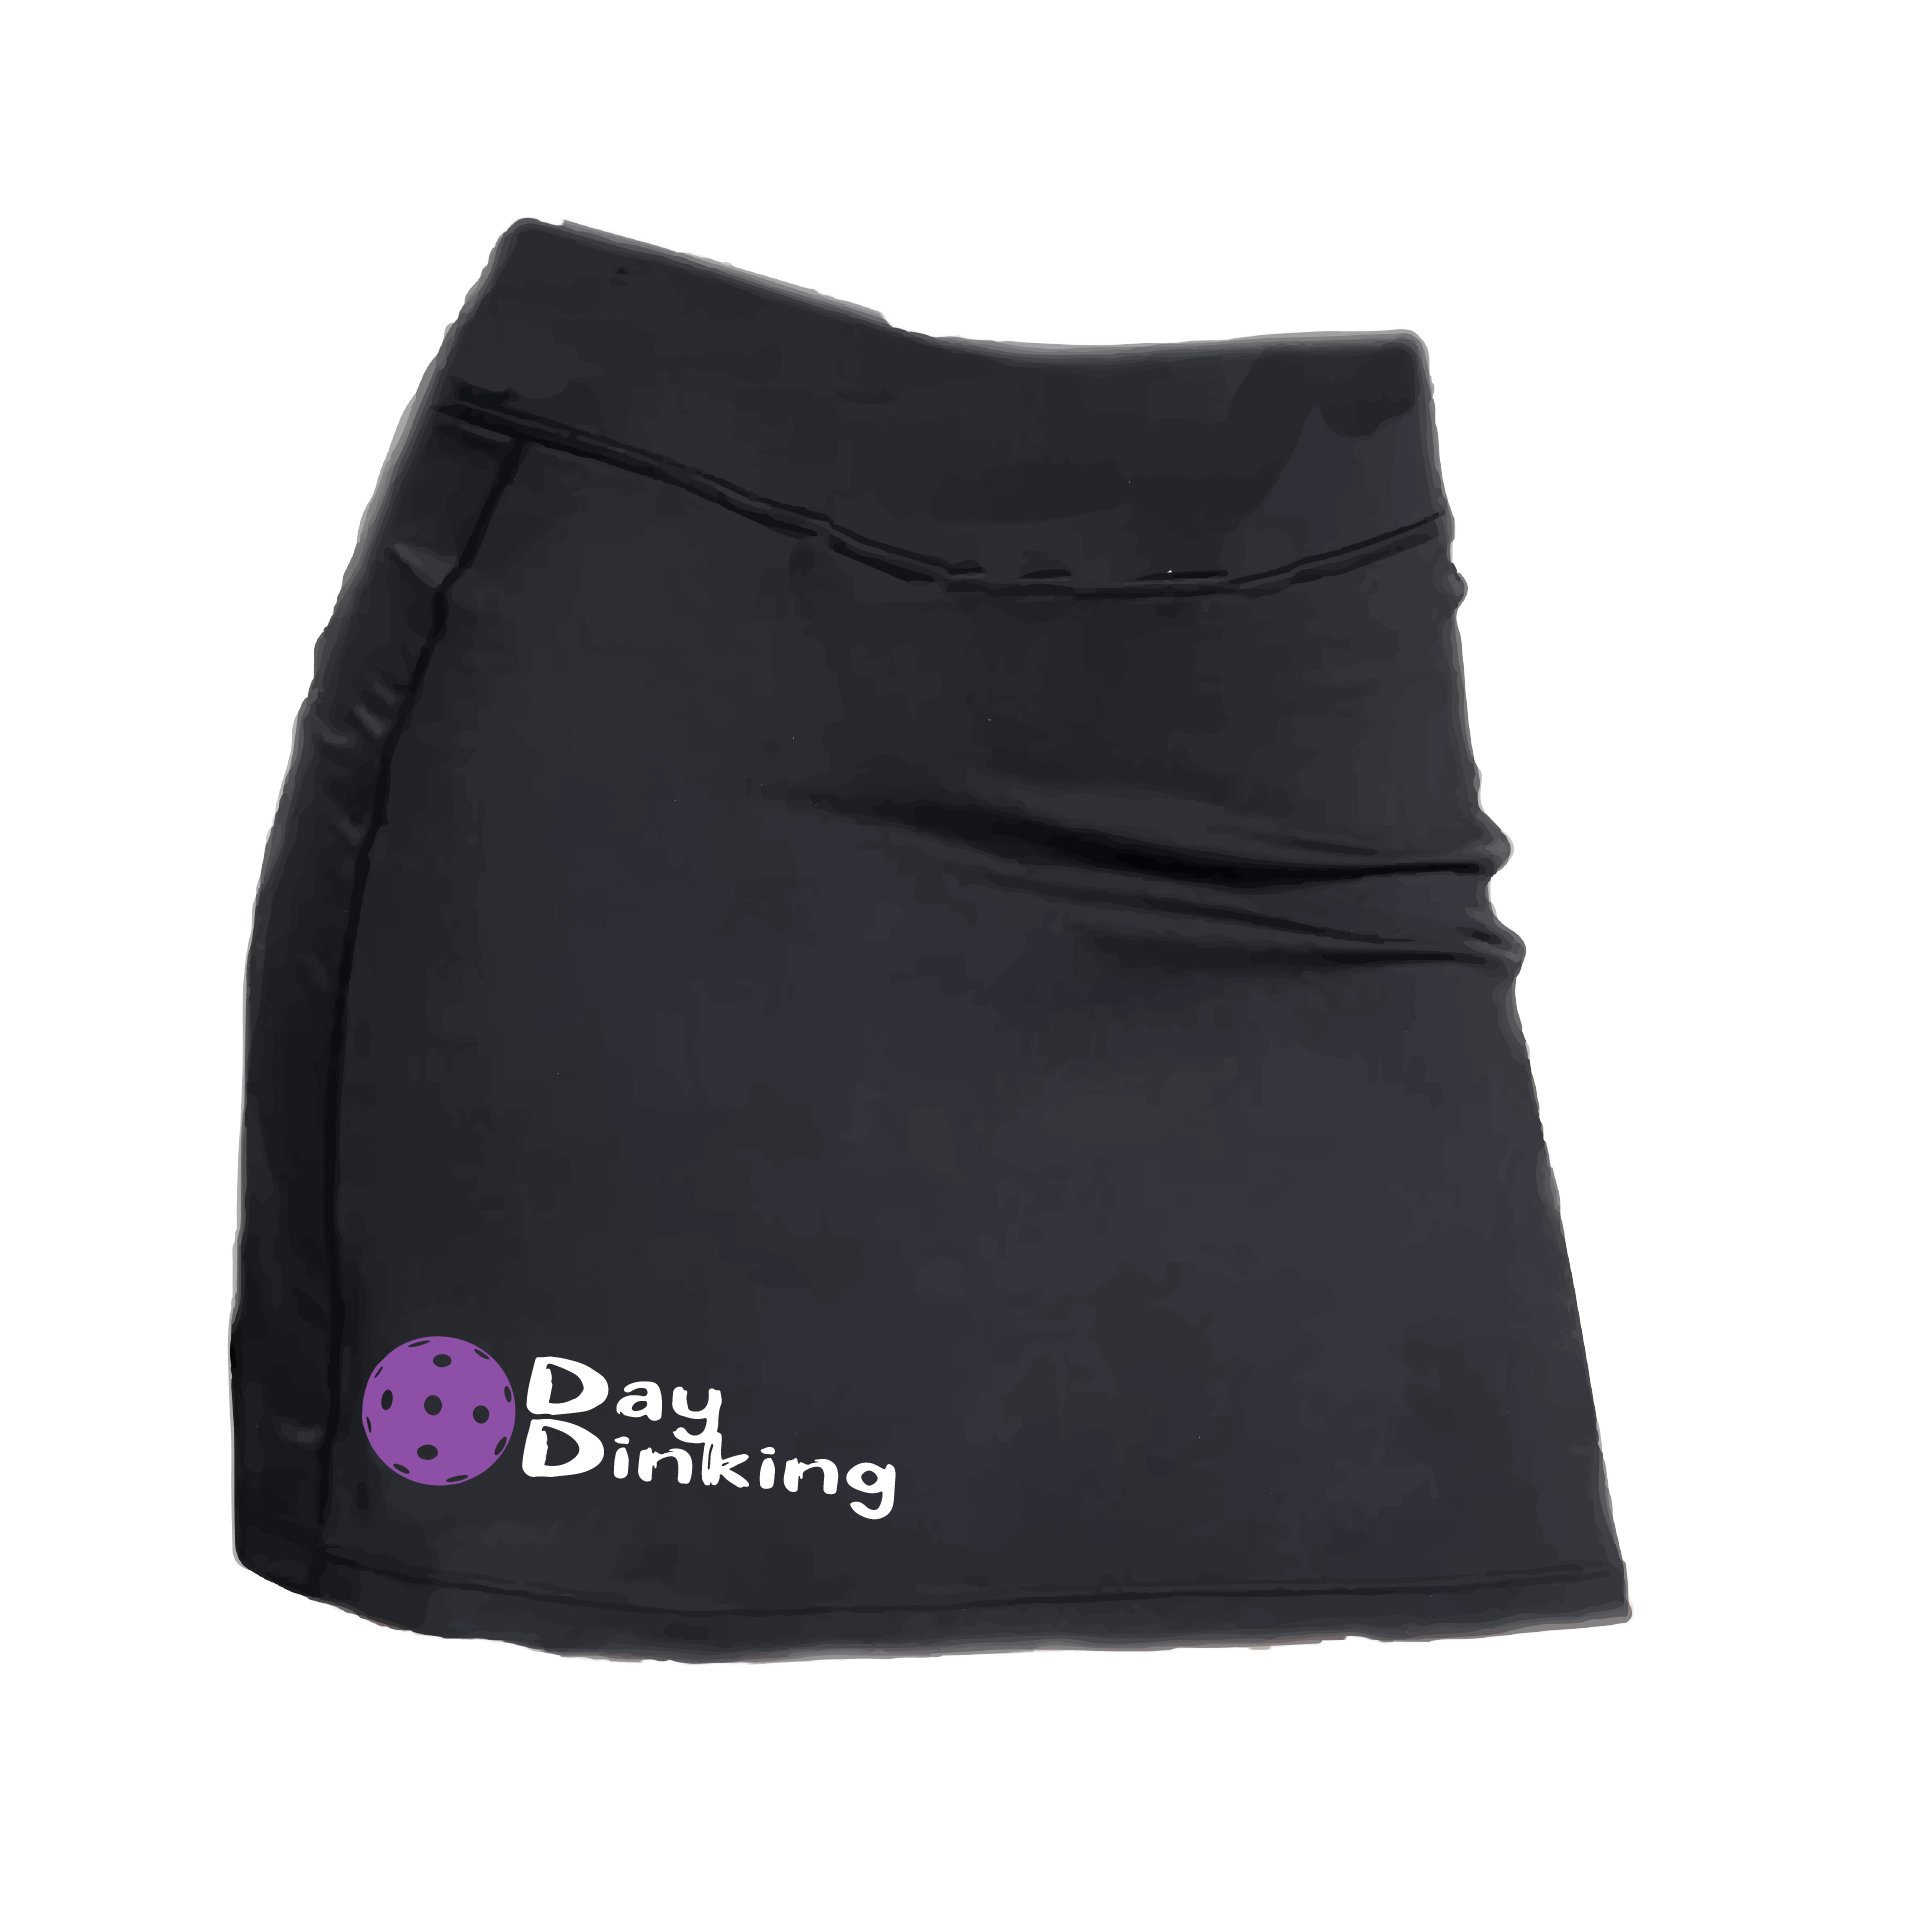 Skort Design: Day Dinking with Customizable Pickleball color (Purple, Rainbow, White, & Yellow.)  Women’s core active jersey-knit skort comes with built-in shorts made out of a poly-spandex blend.  The fabric is breathable, featuring Dri-Works wicking technology which allows your skin to breathe while simultaneously absorbing the moisture, keeping you dry and comfortable.